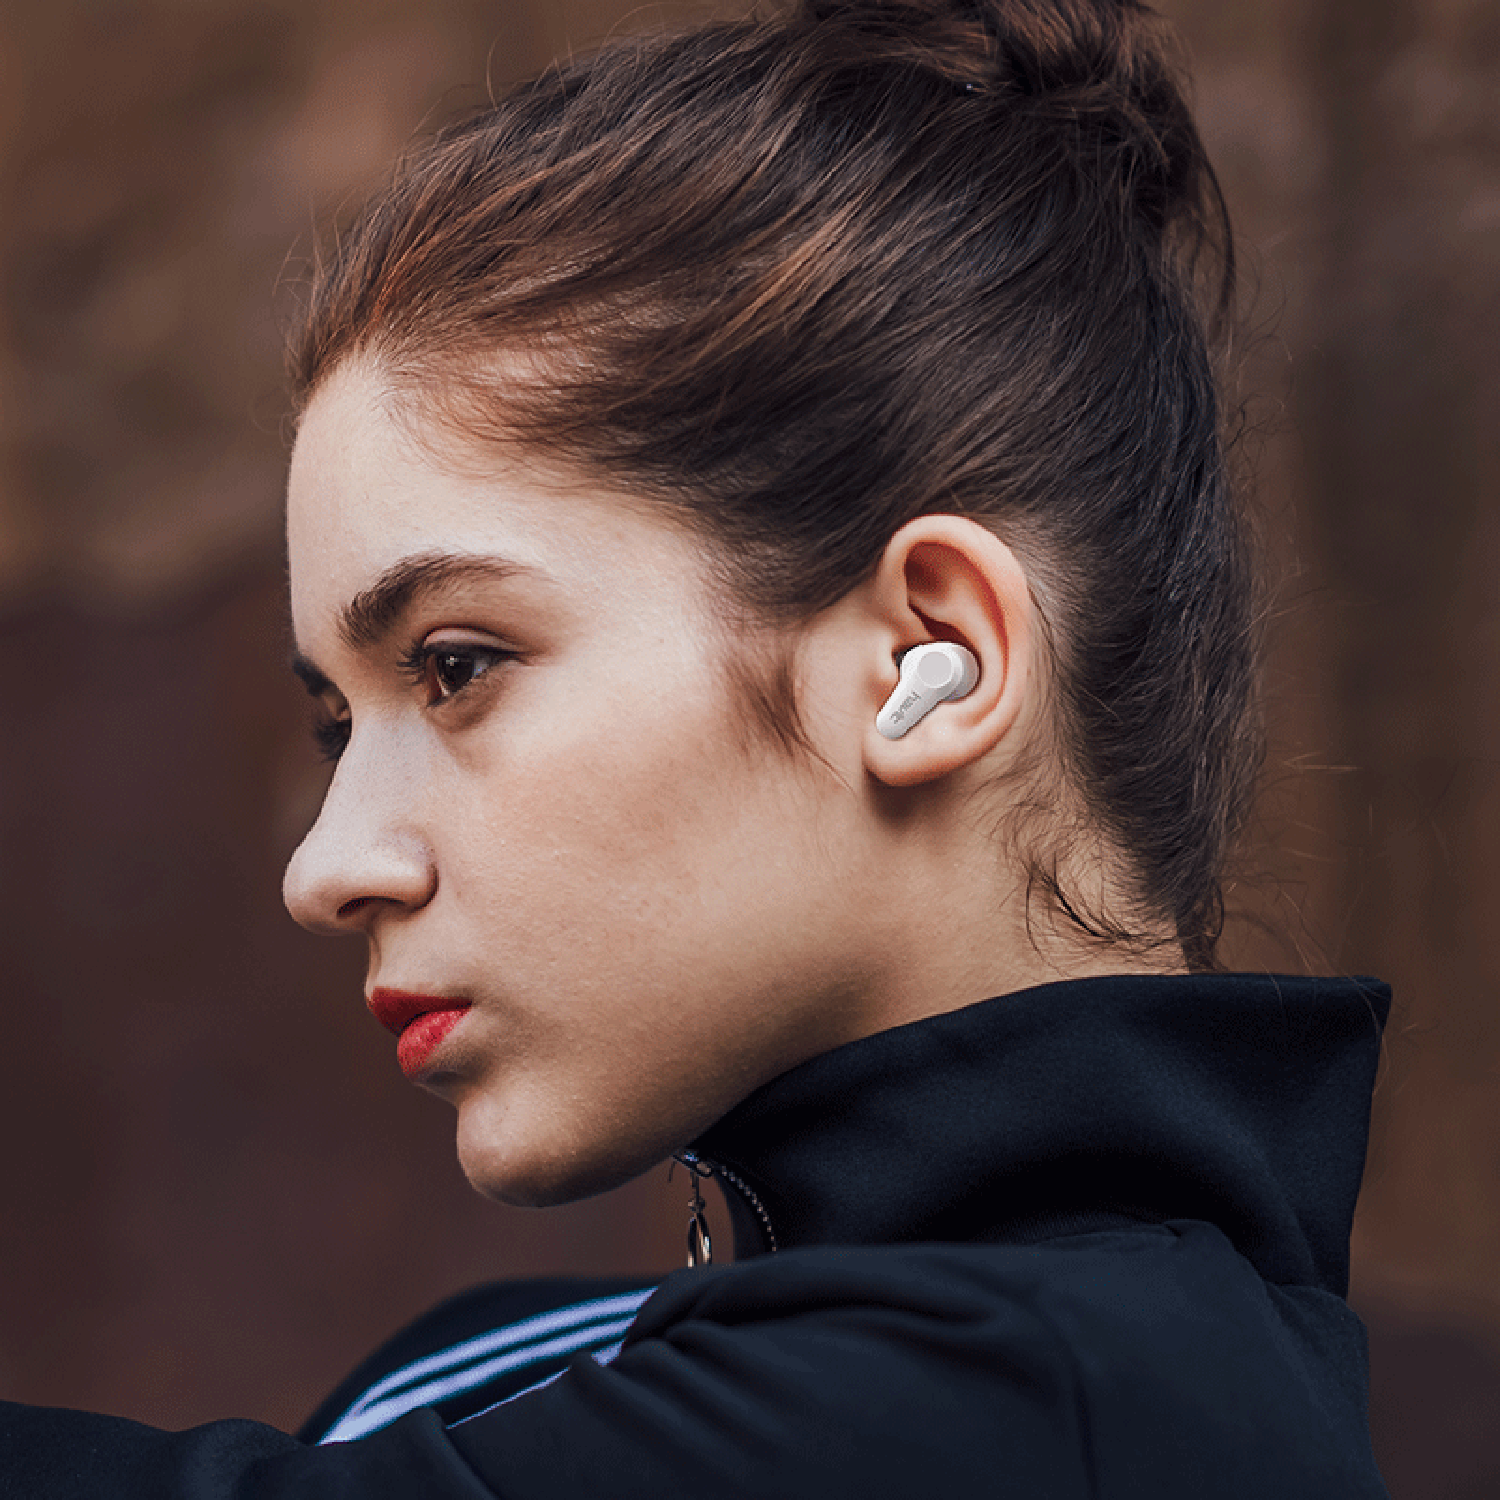 HAVIT TW915 ANC True Wireless Earbuds, with Active Noise Cancelling & 3 Playing Modes